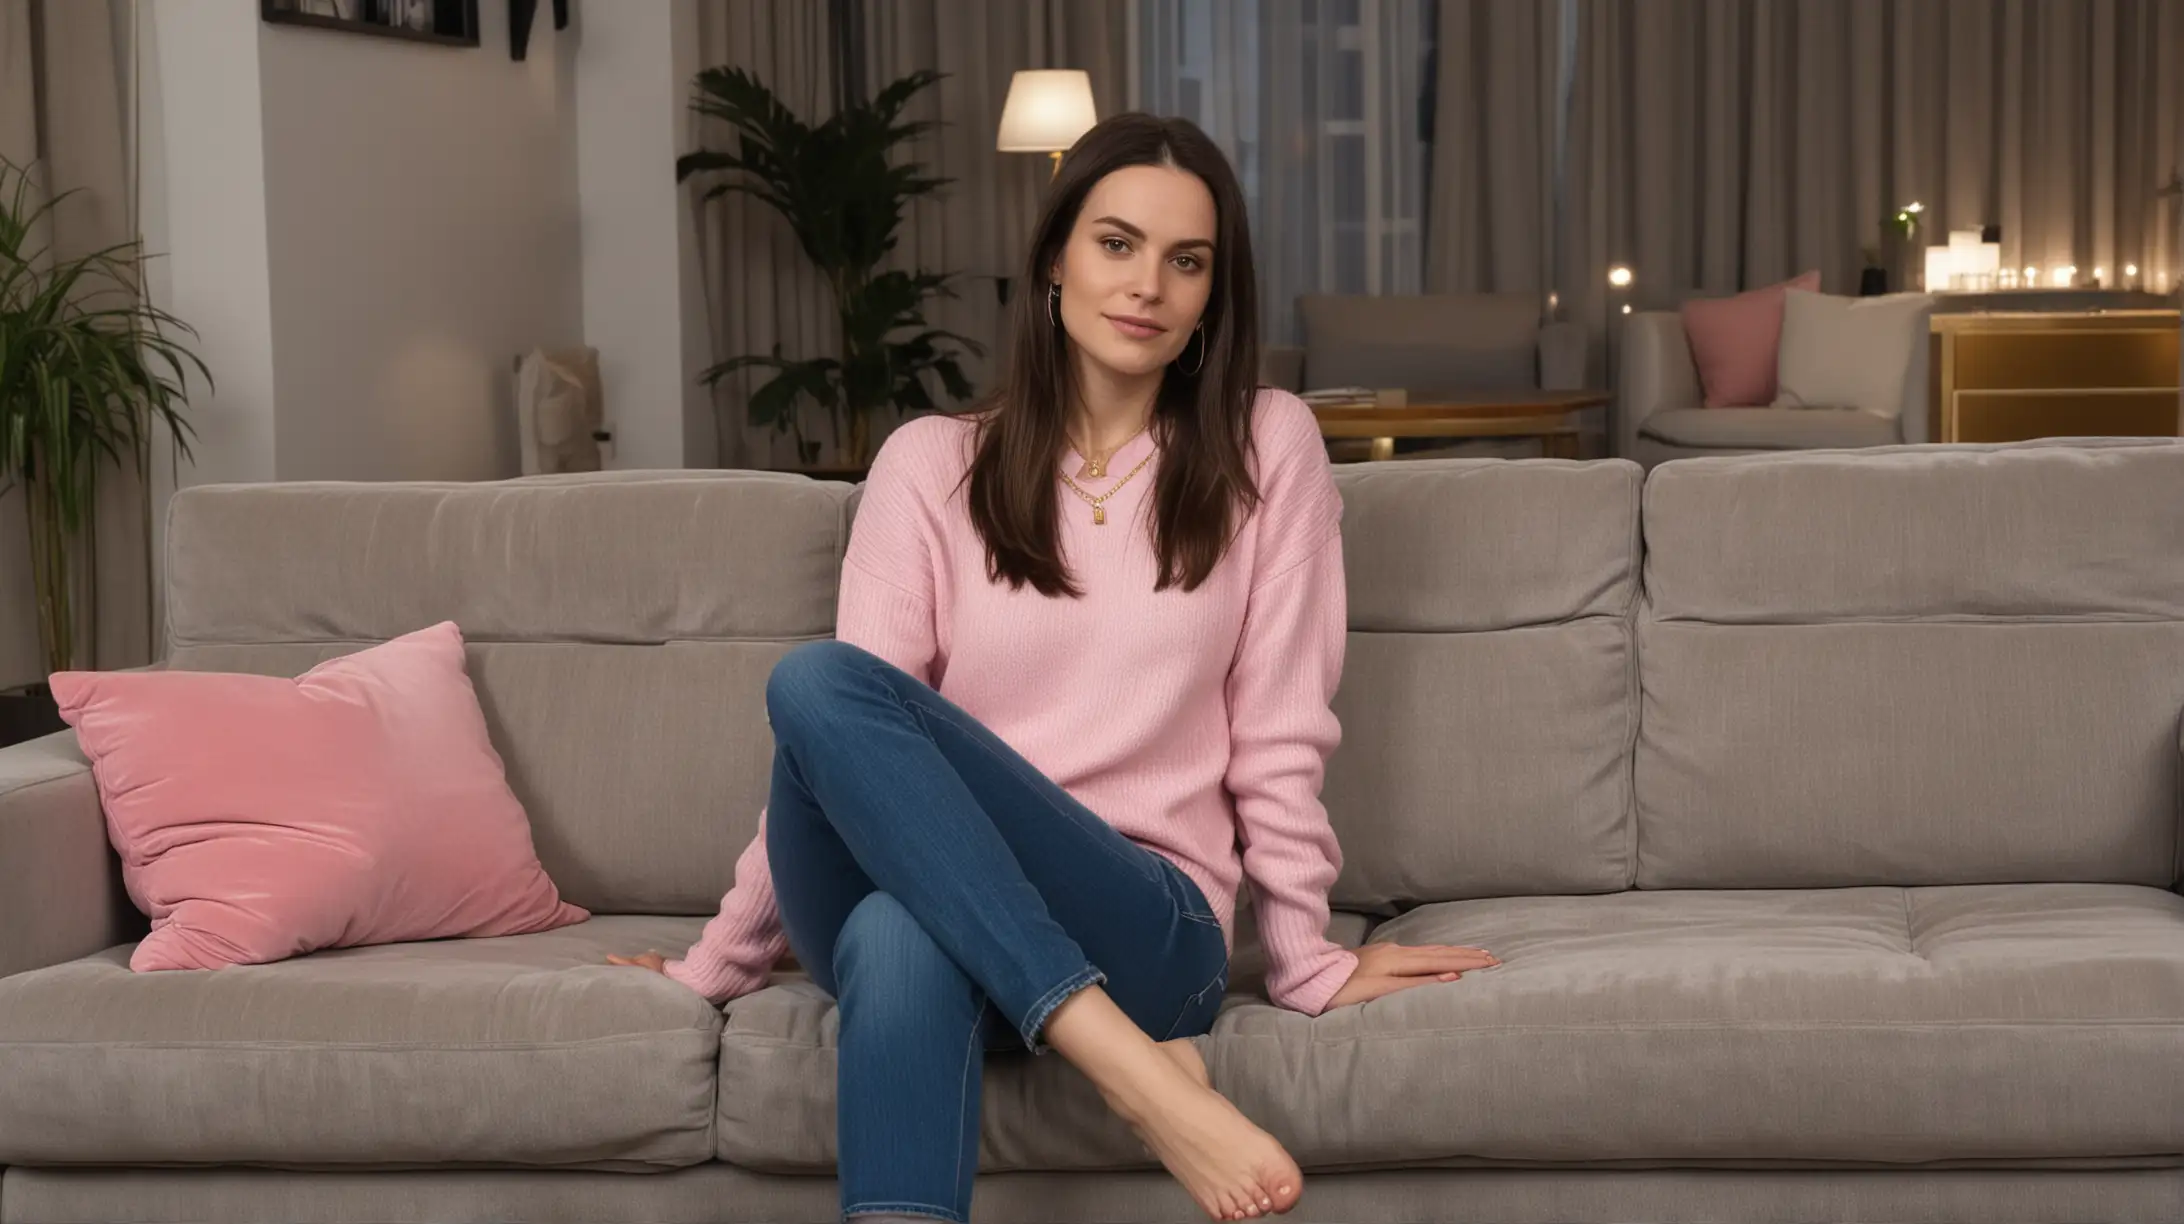 30 year old pale white woman with long dark brown hair, parted to the right, wearing a pink sweater, blue jeans, closed slippers and a gold necklace. She is sitting down in a gray couch with legs crossed, modern high rise urban apartment background at night